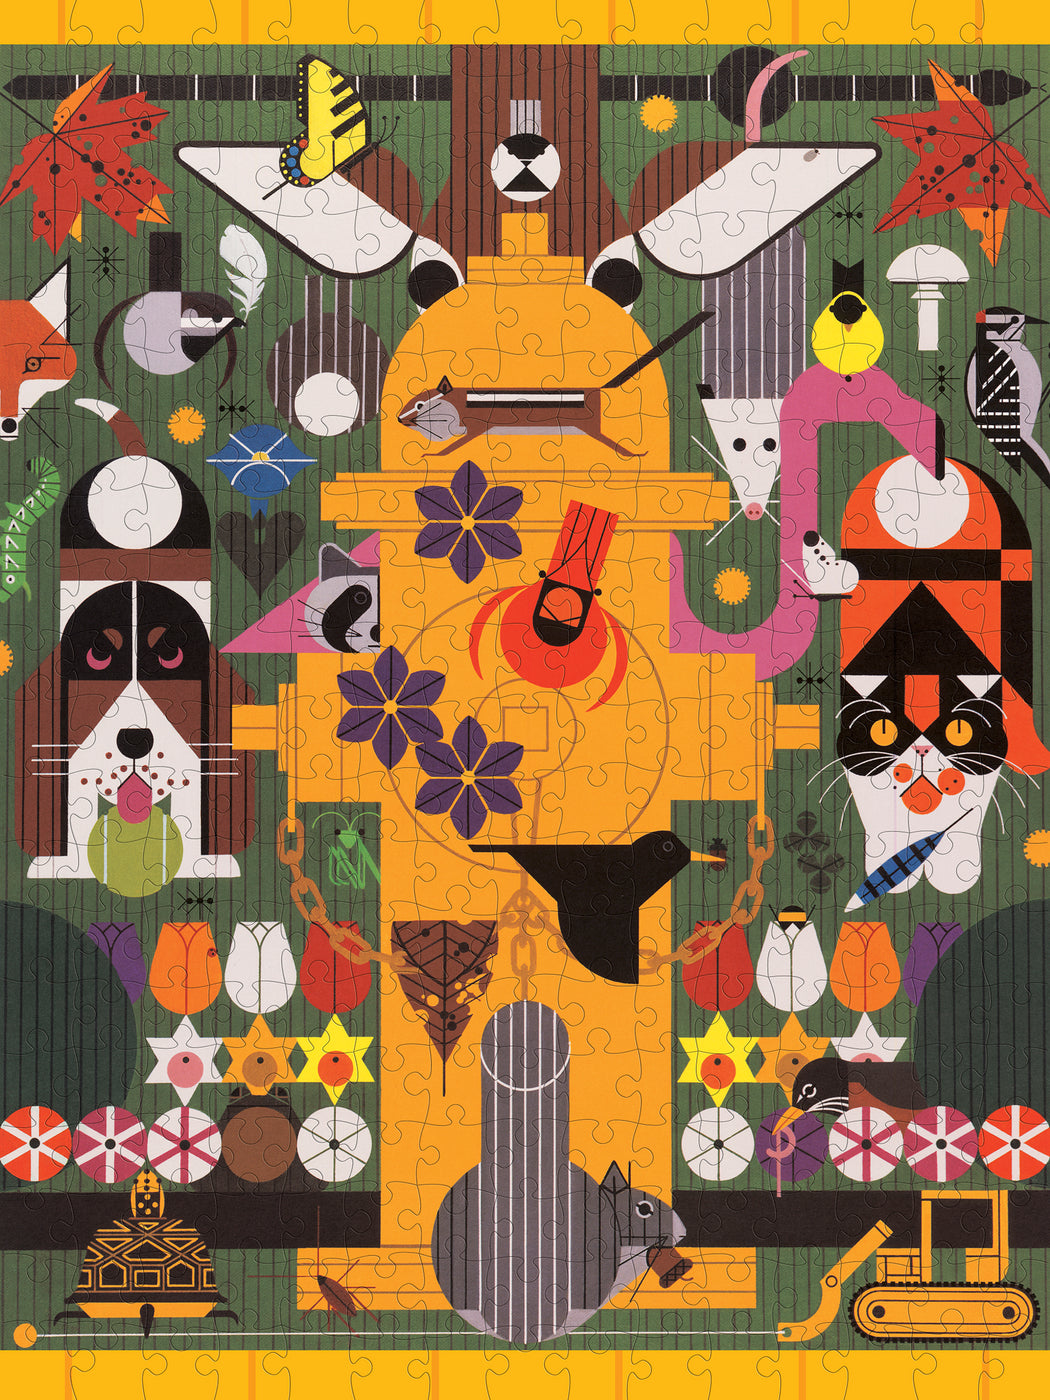 Charley Harper: Biodiversity in the Burbs 300-piece Jigsaw Puzzle_Zoom